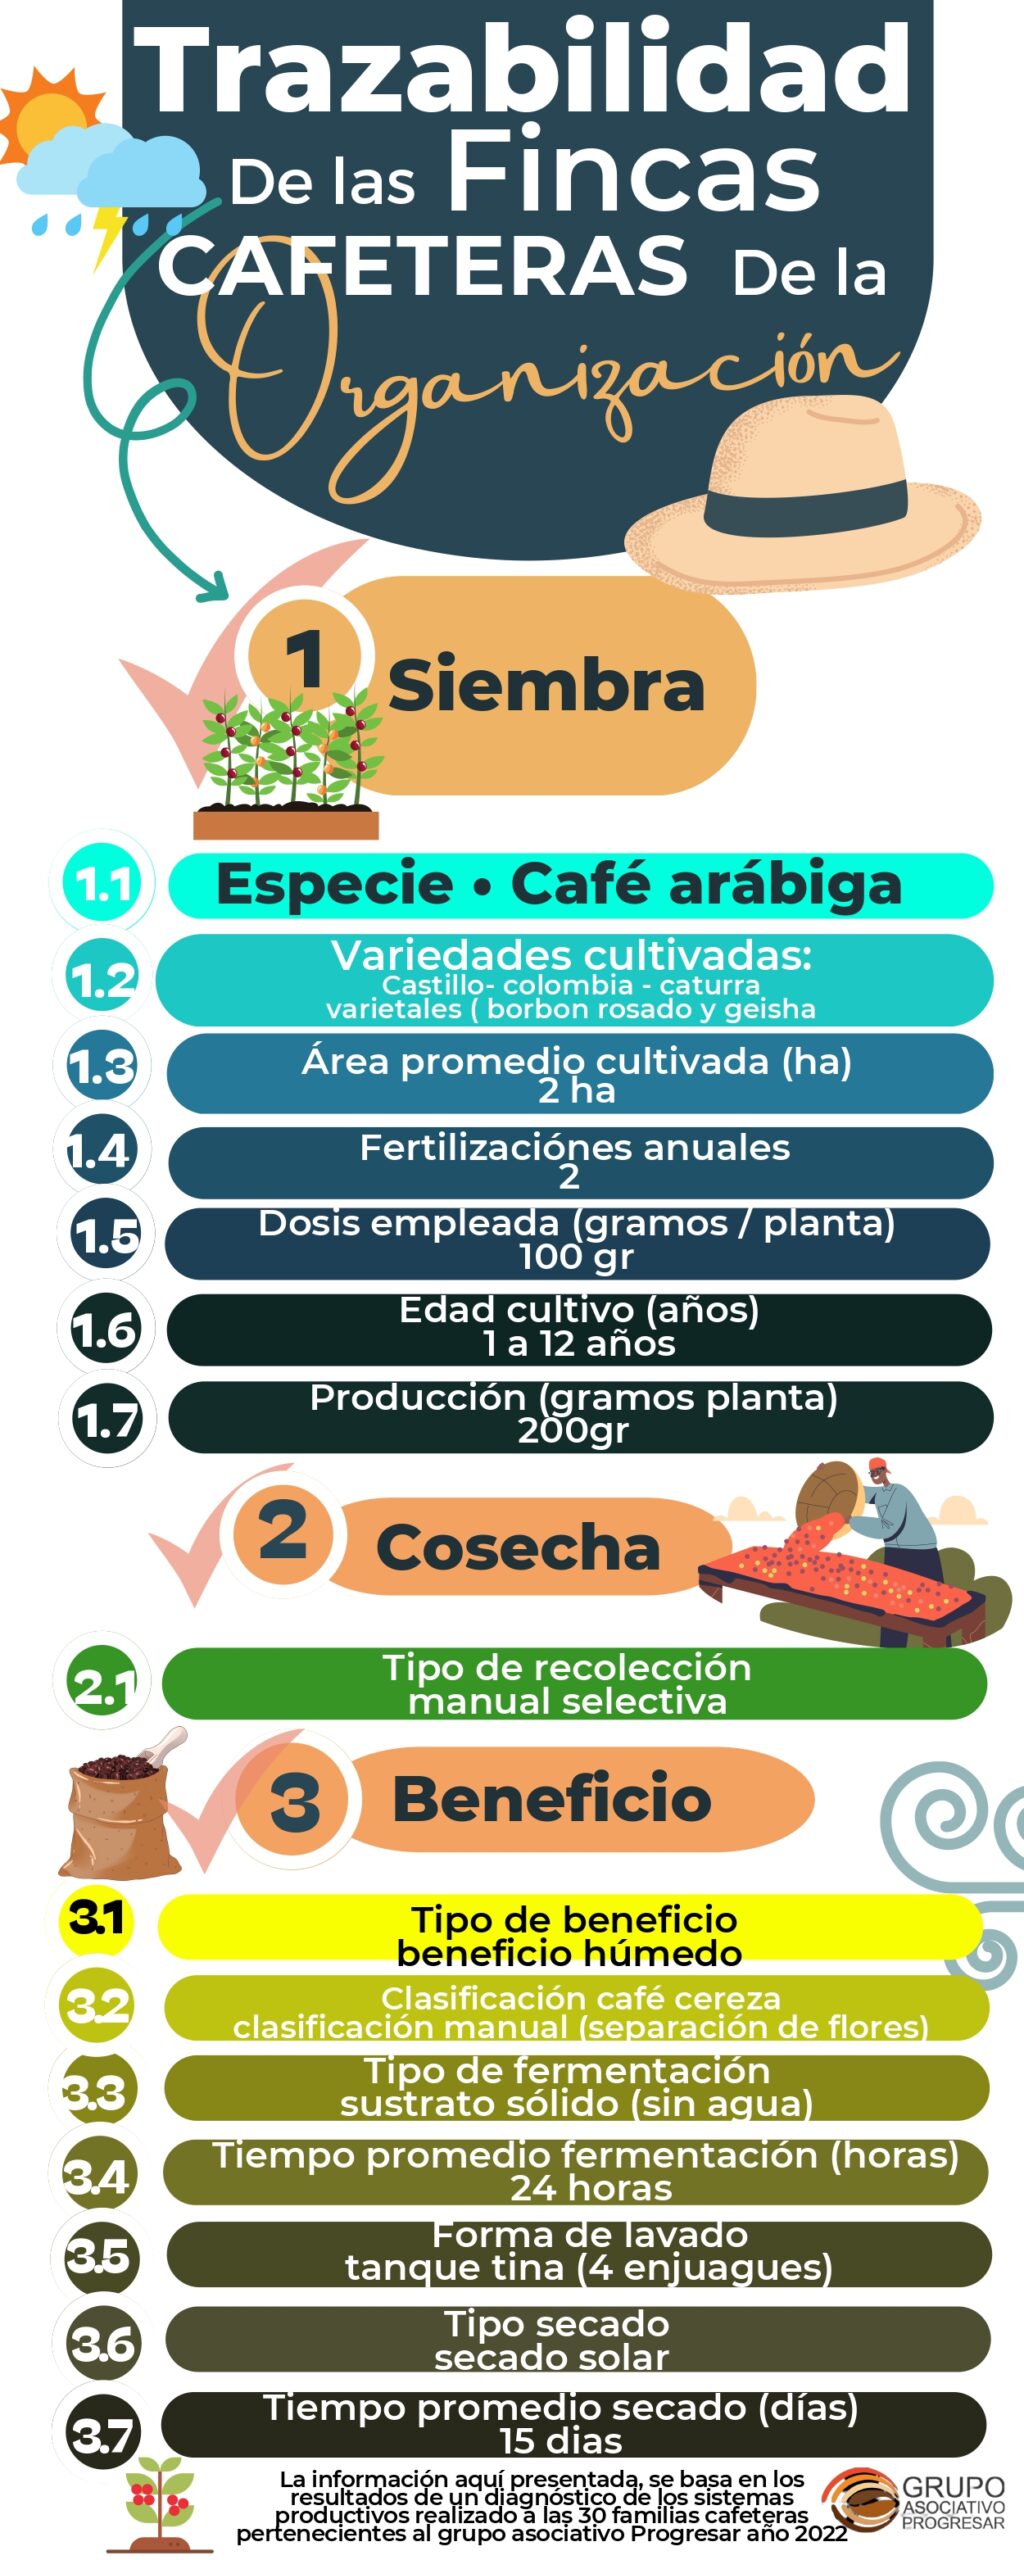 Technical data sheet of the coffee produced by the organization